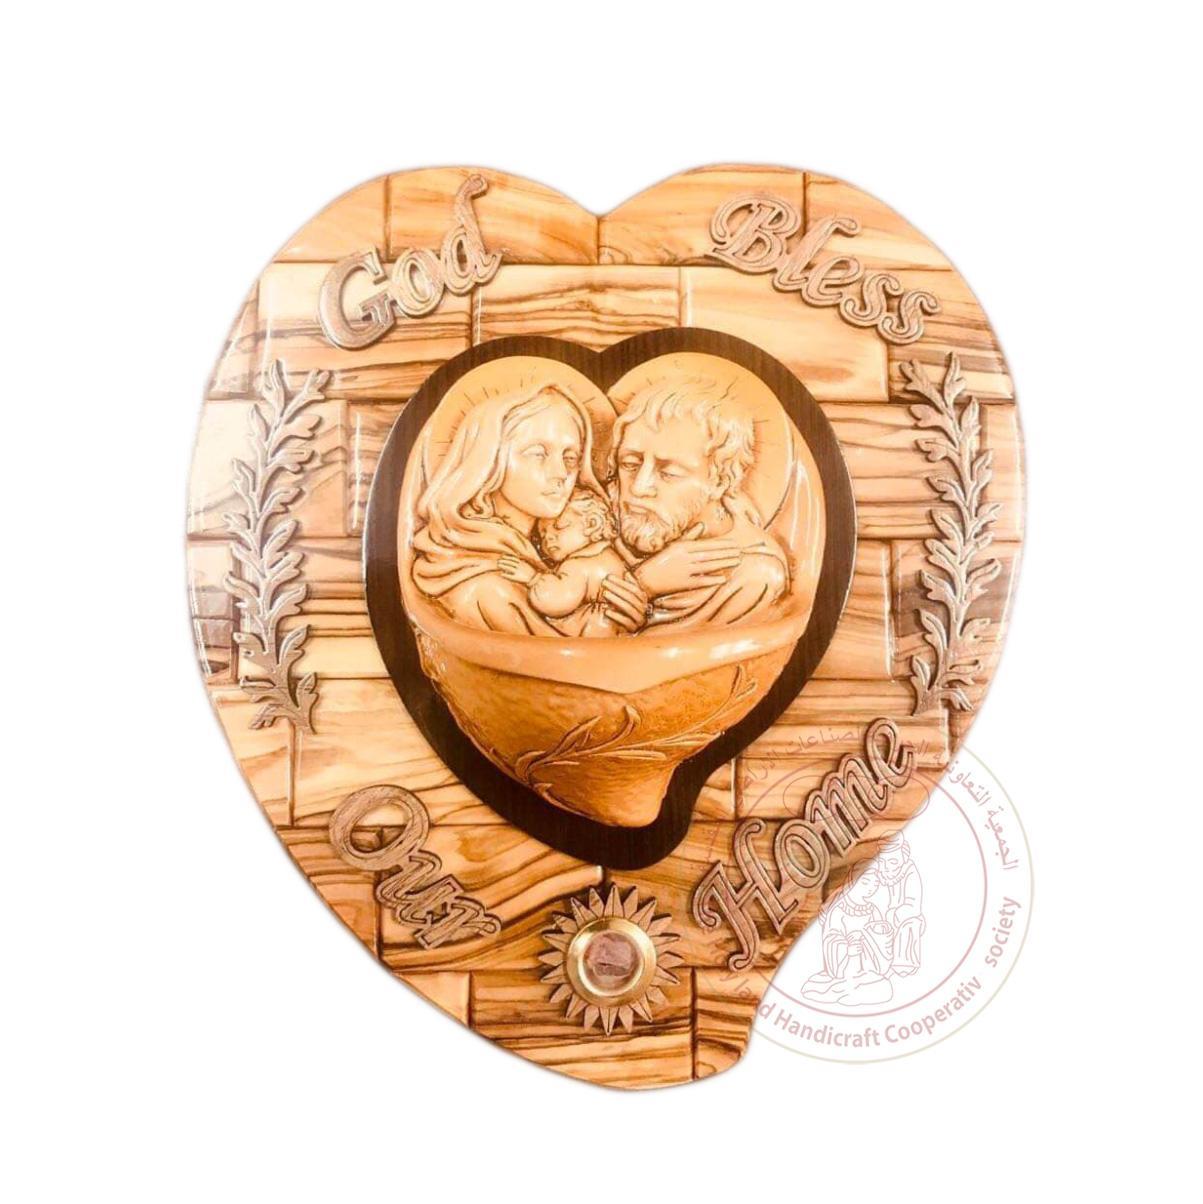 God Bless our Home' Heart-Shaped Plaque w/Holy Family & Inlaid Incense - Olive Wood & Gypsum Relief